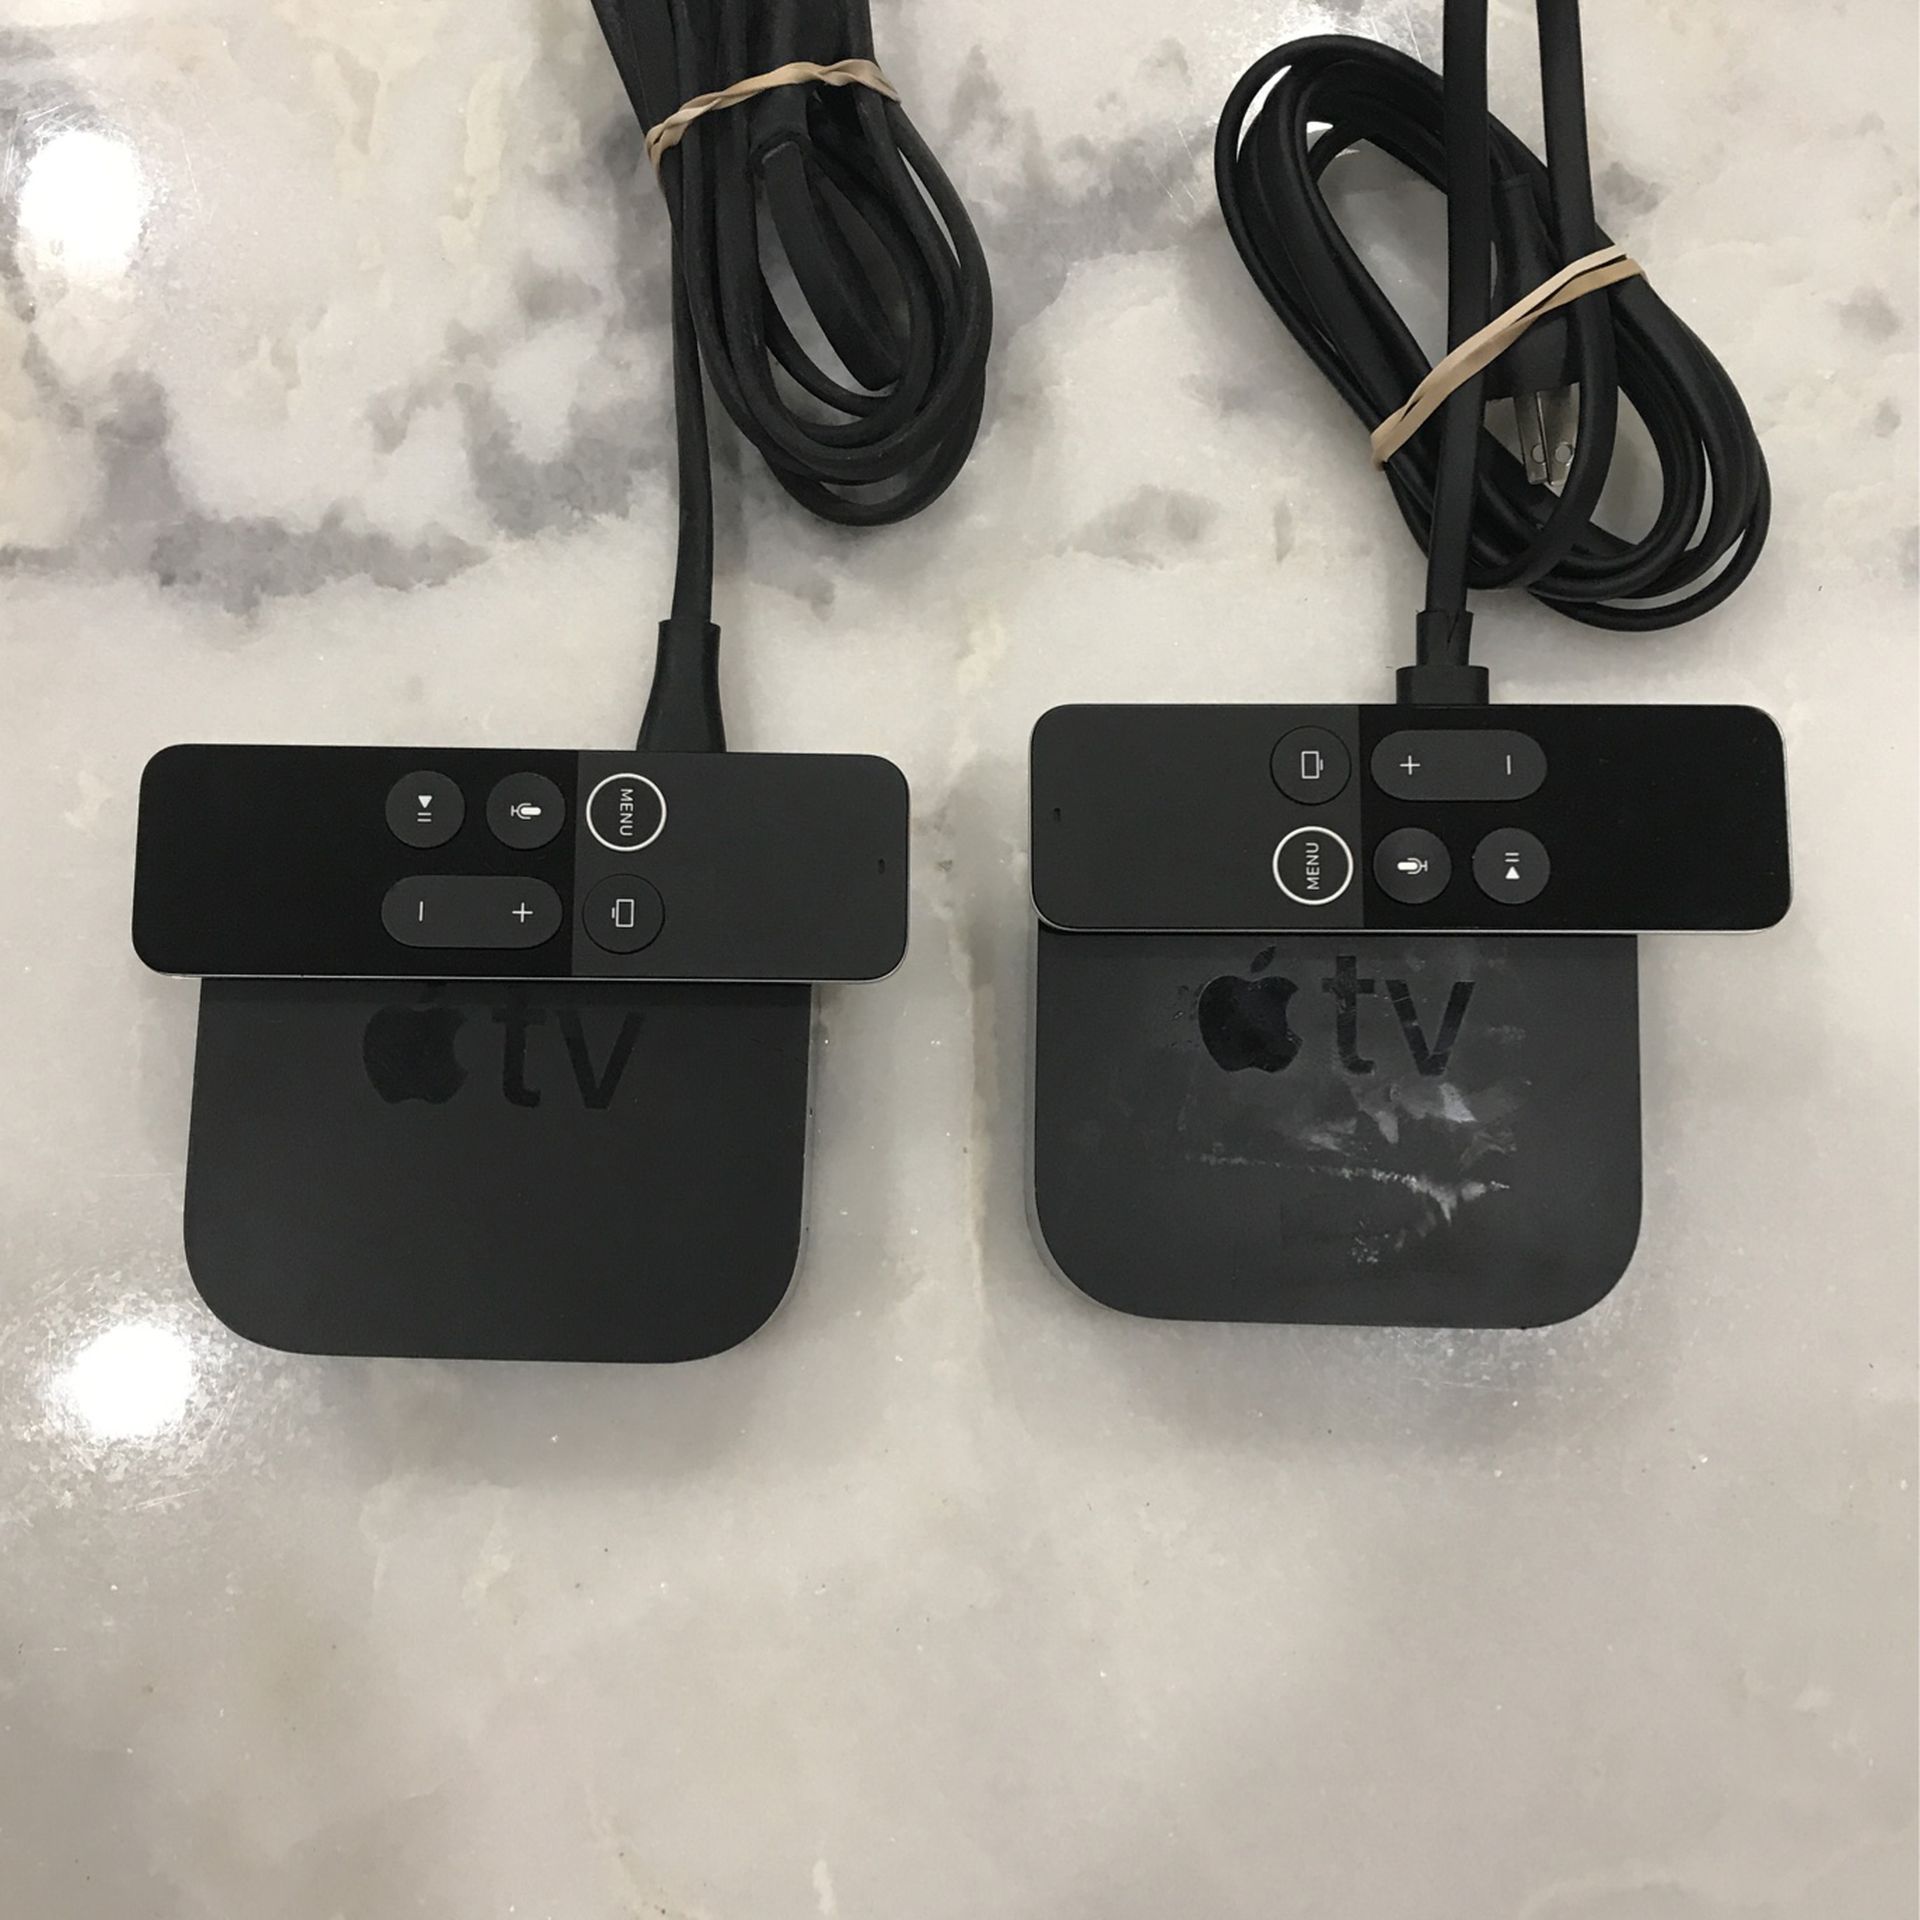 Two Apple Tv Boxes With Remotes - $35